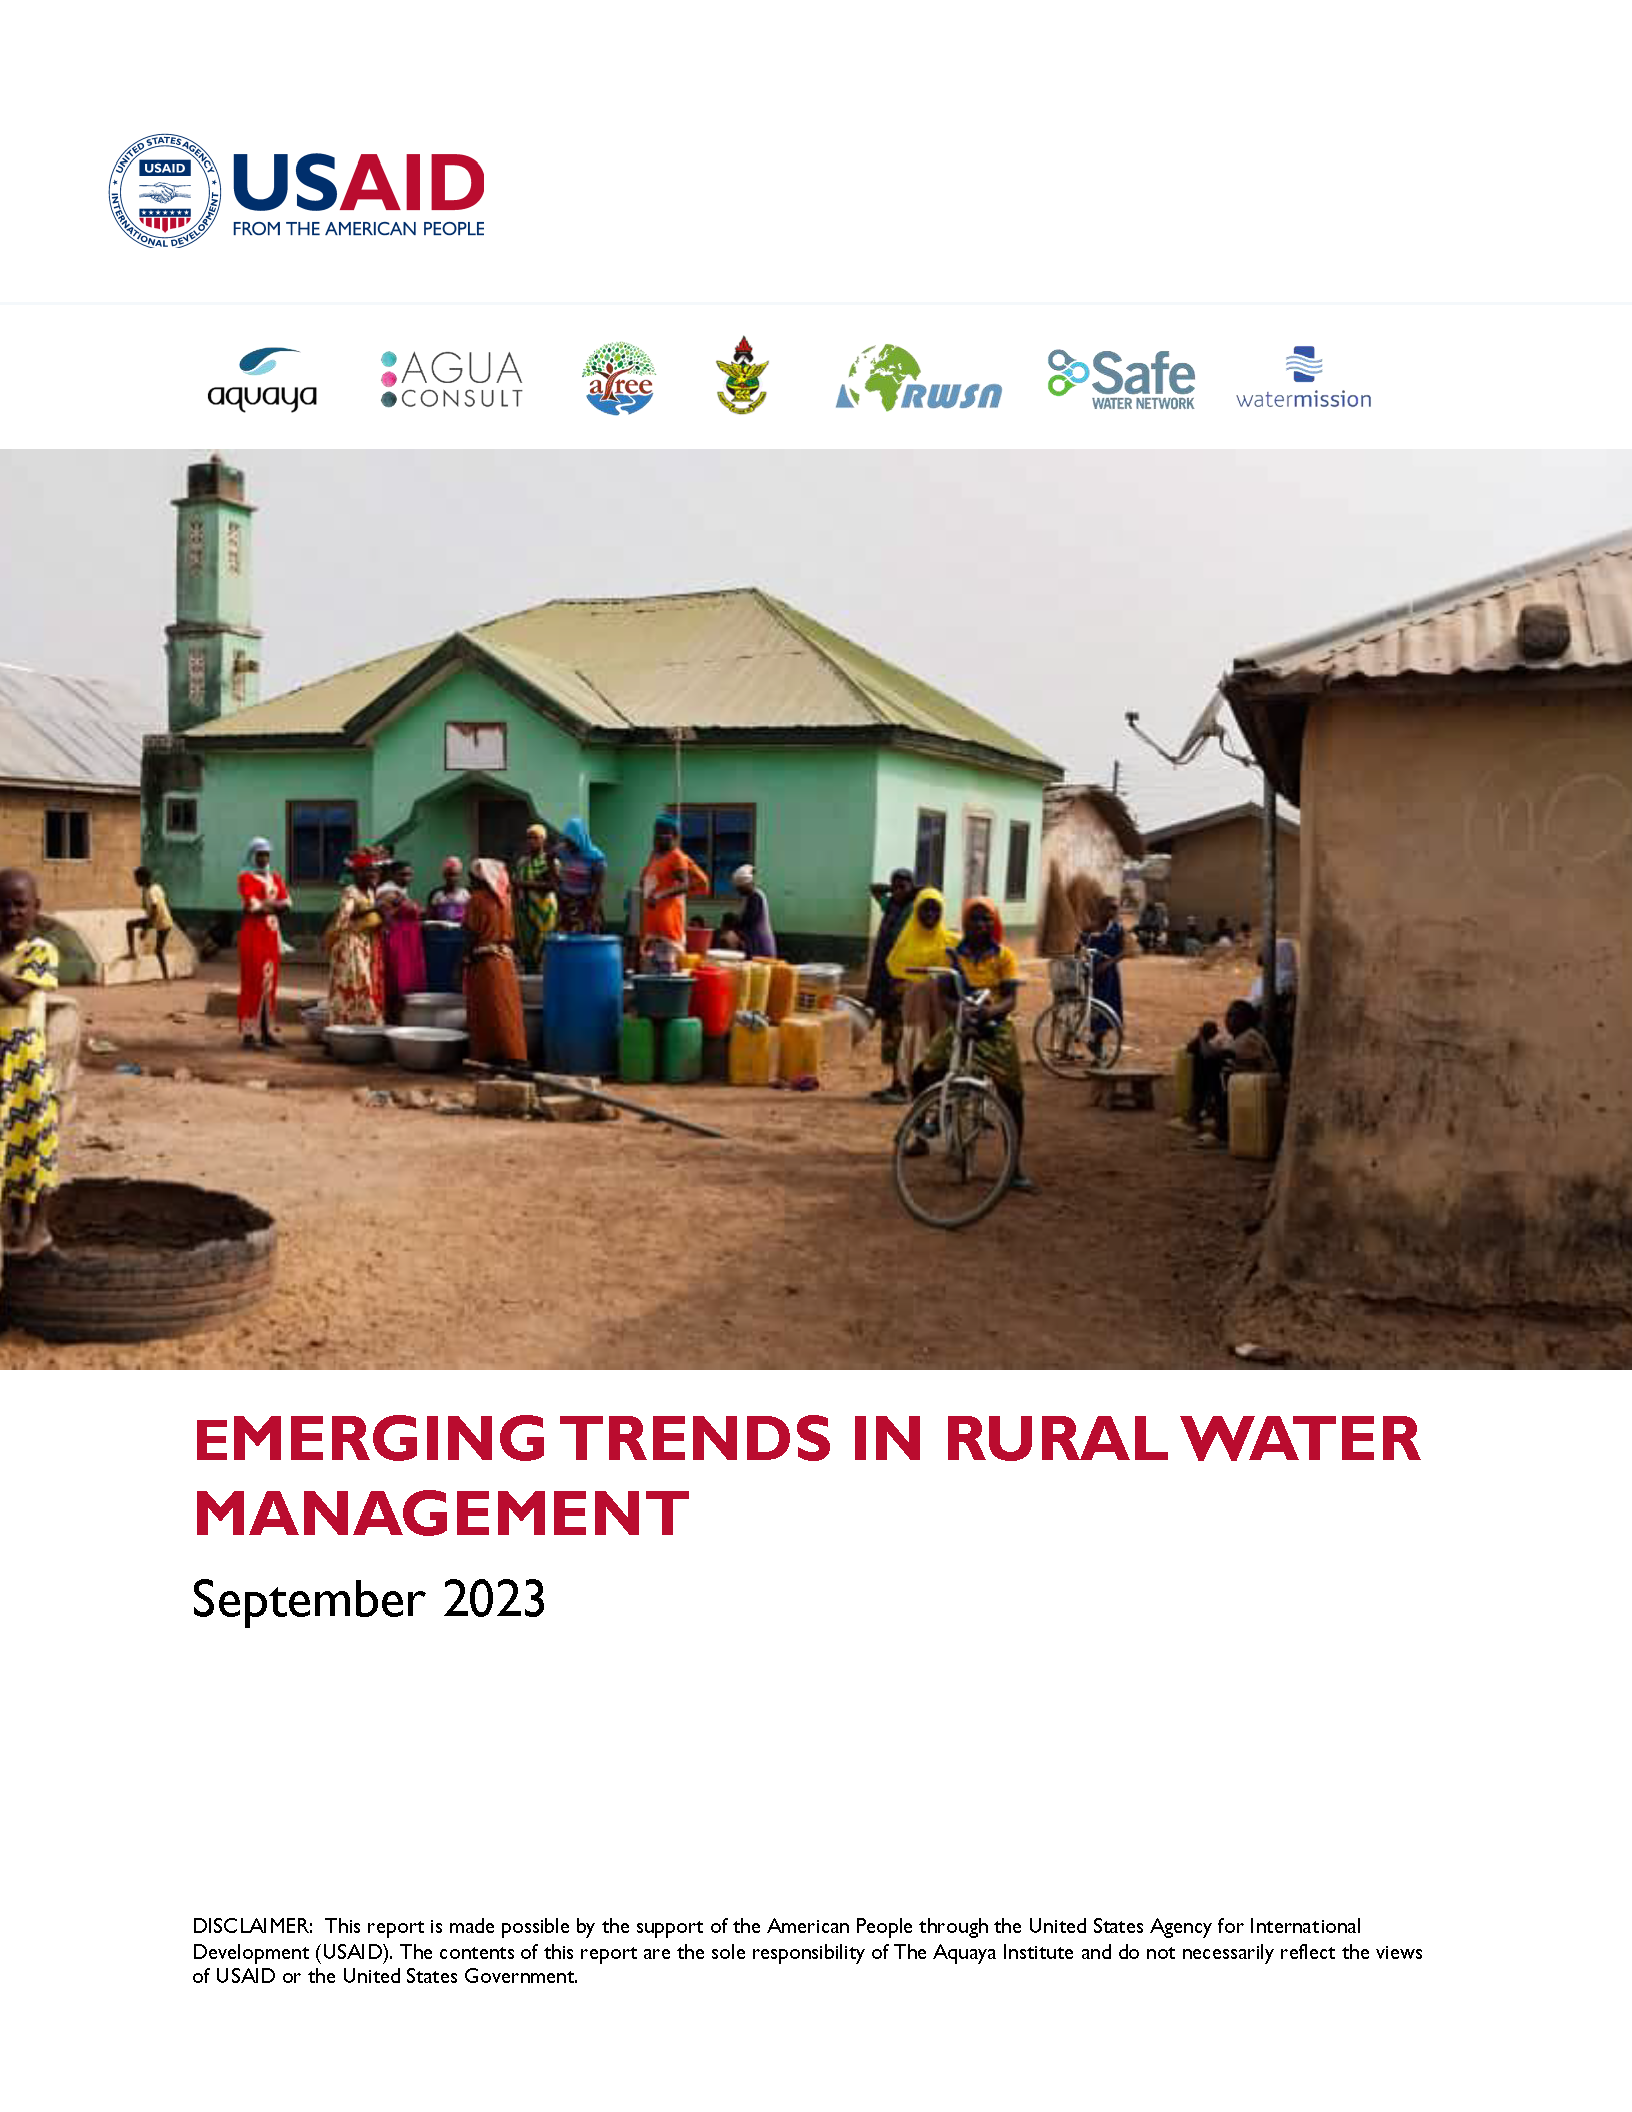 Cover Page of Emerging Trends in Rural Water Management